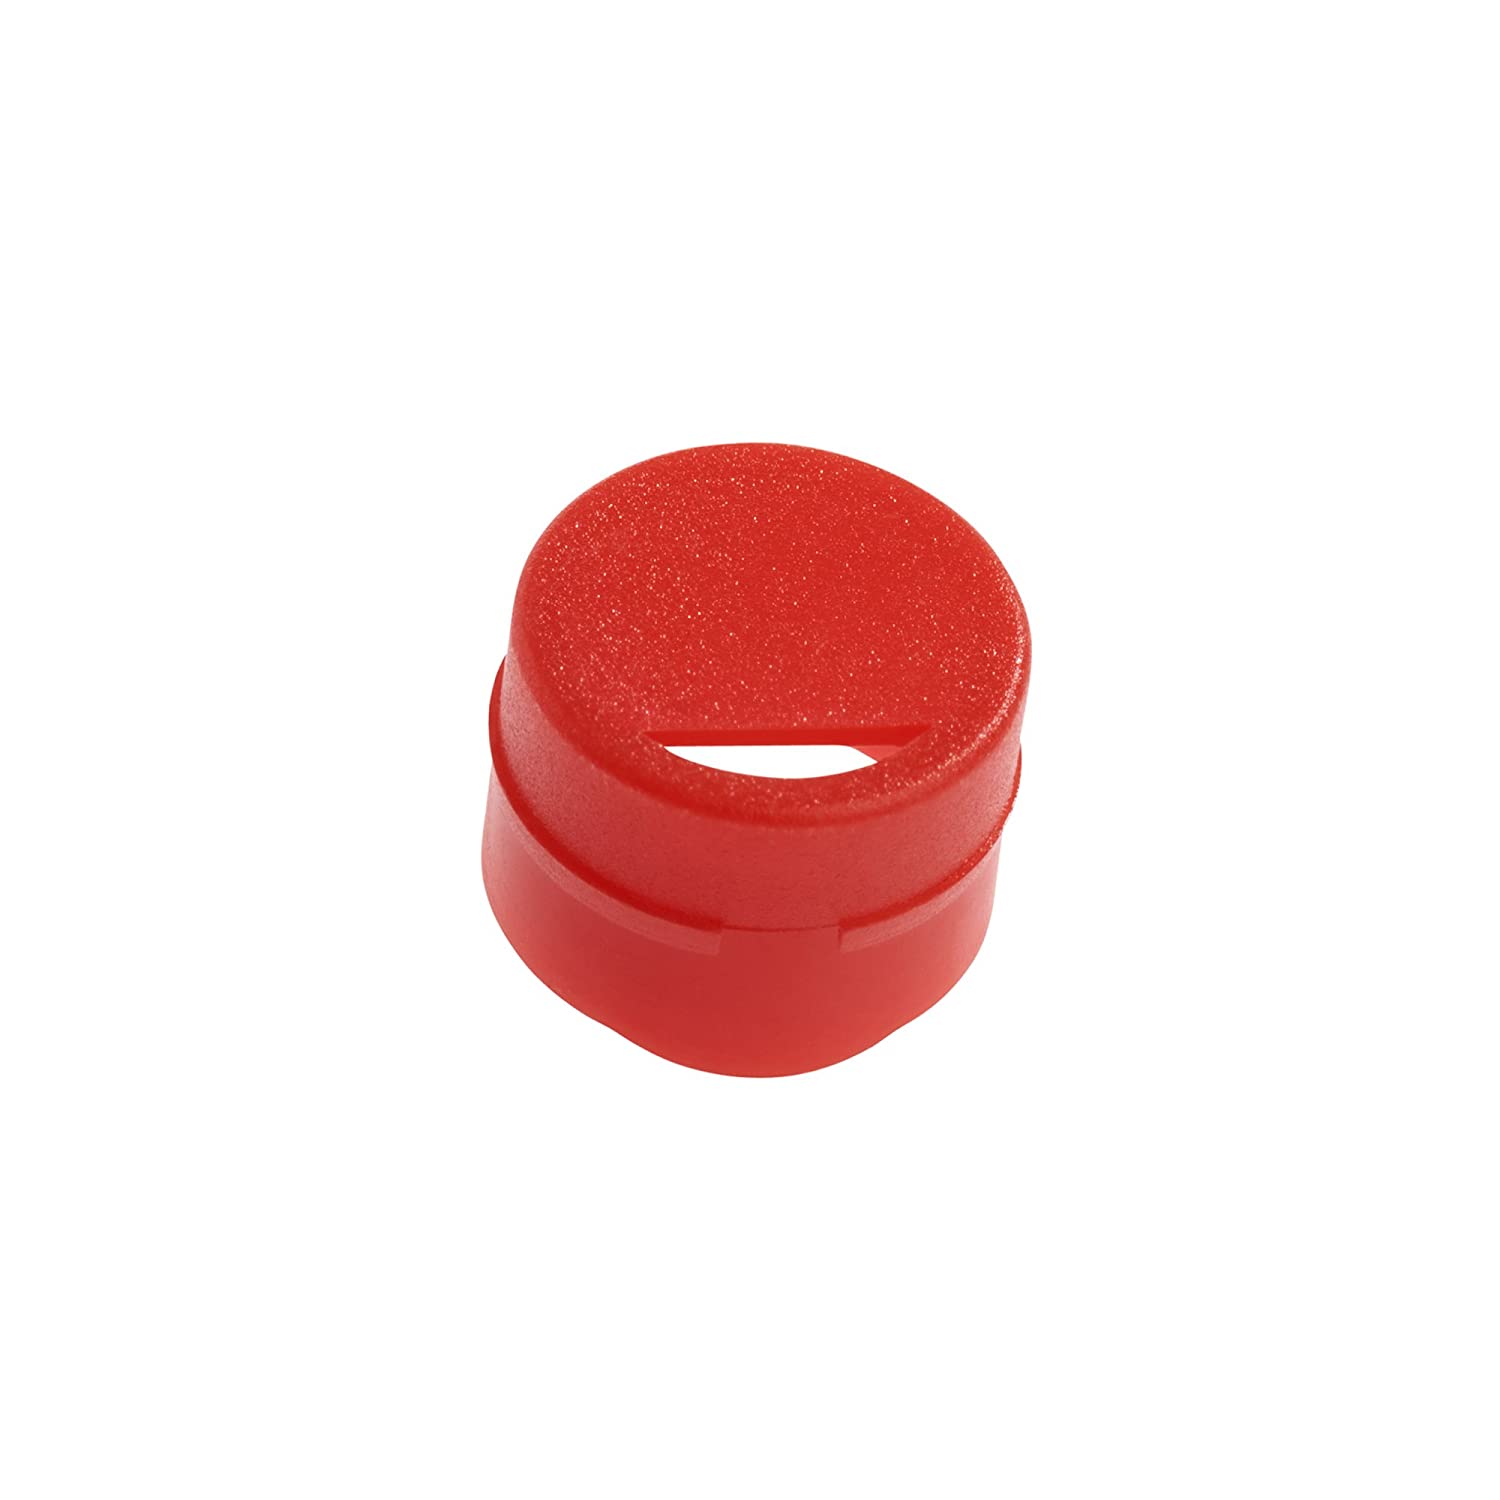 Celltreat 229930 Red Cap Insert for CF Cryogenic Vials, Non-sterile